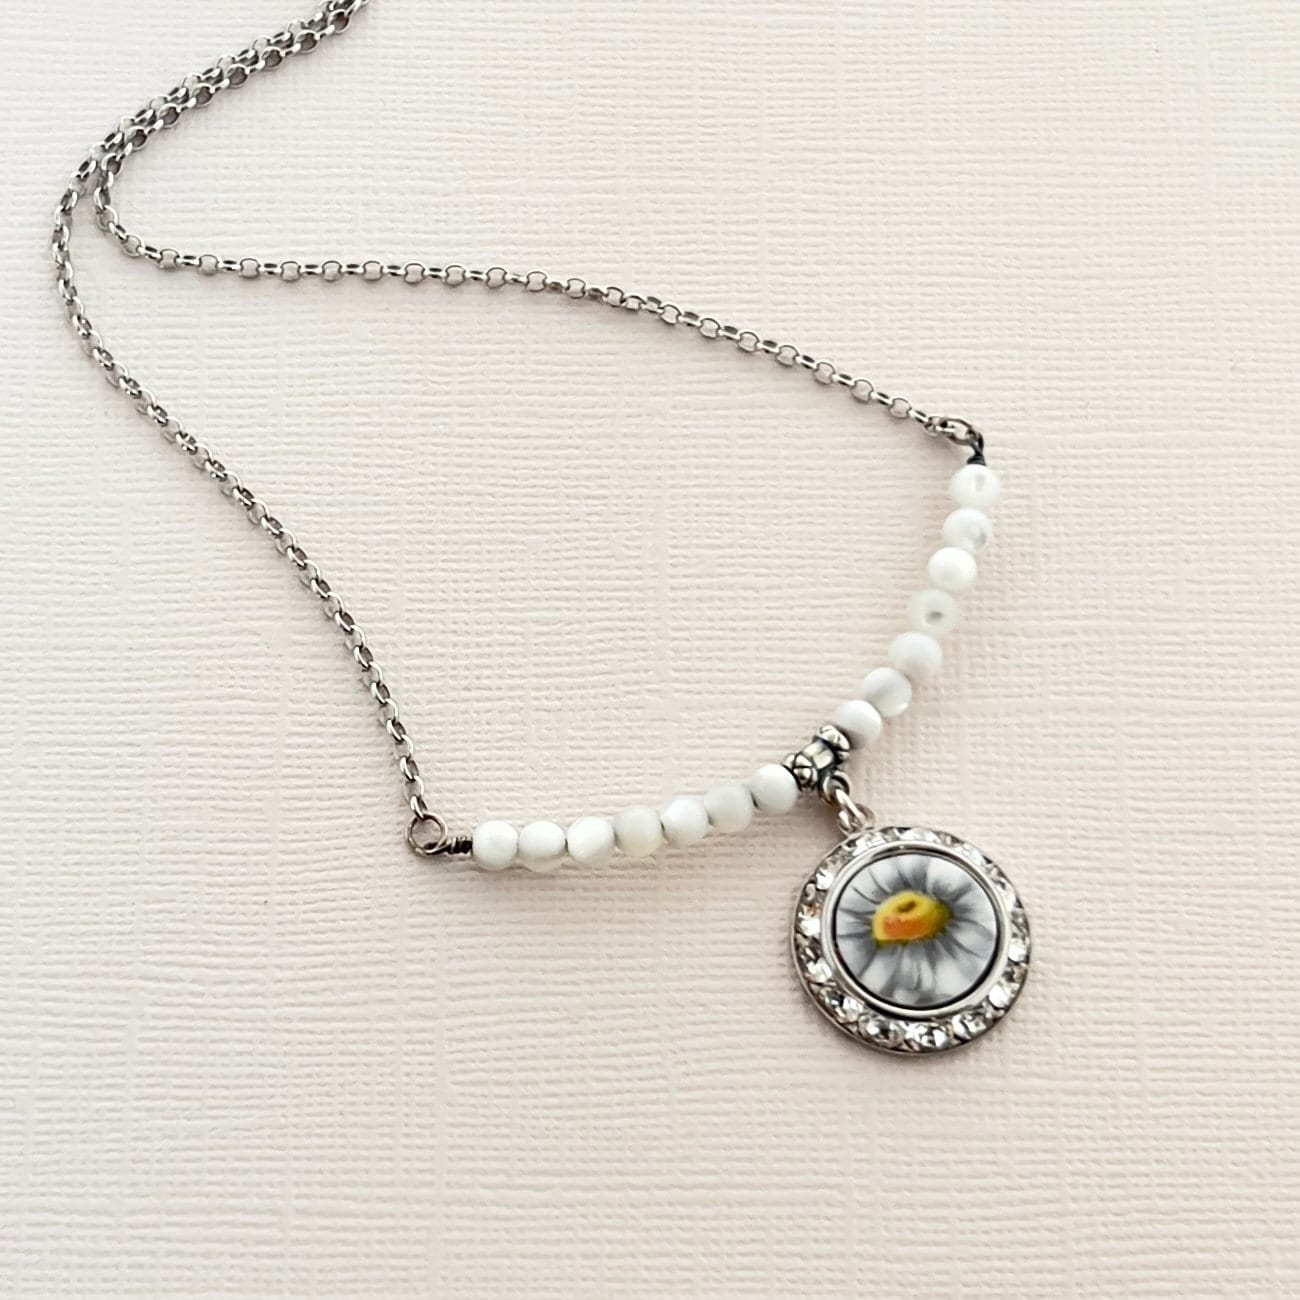 Crystal Daisy Necklace, White Mother of Pearl Summer Necklace, Broken China Jewelry